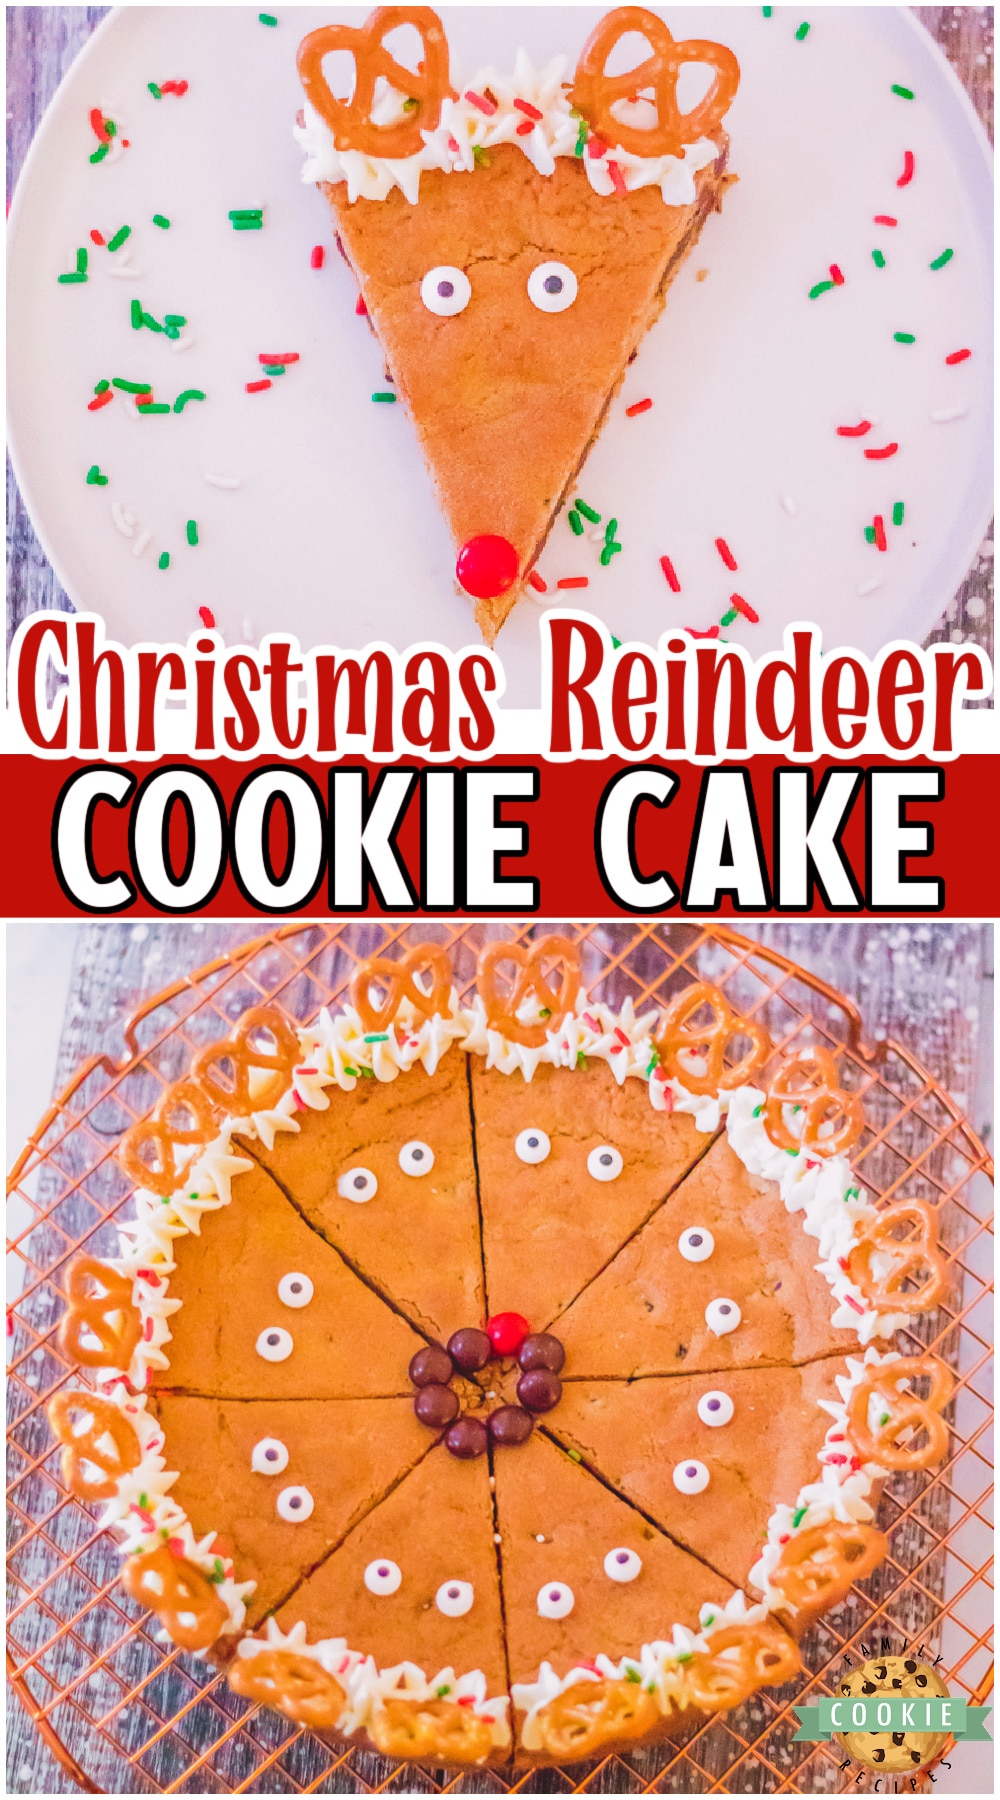 Christmas Reindeer Cookie Cake made with chocolate chip cookie dough & topped with simple candy to look like reindeer! Easy, festive holiday cookie cake that's Rudolph approved!  via @buttergirls